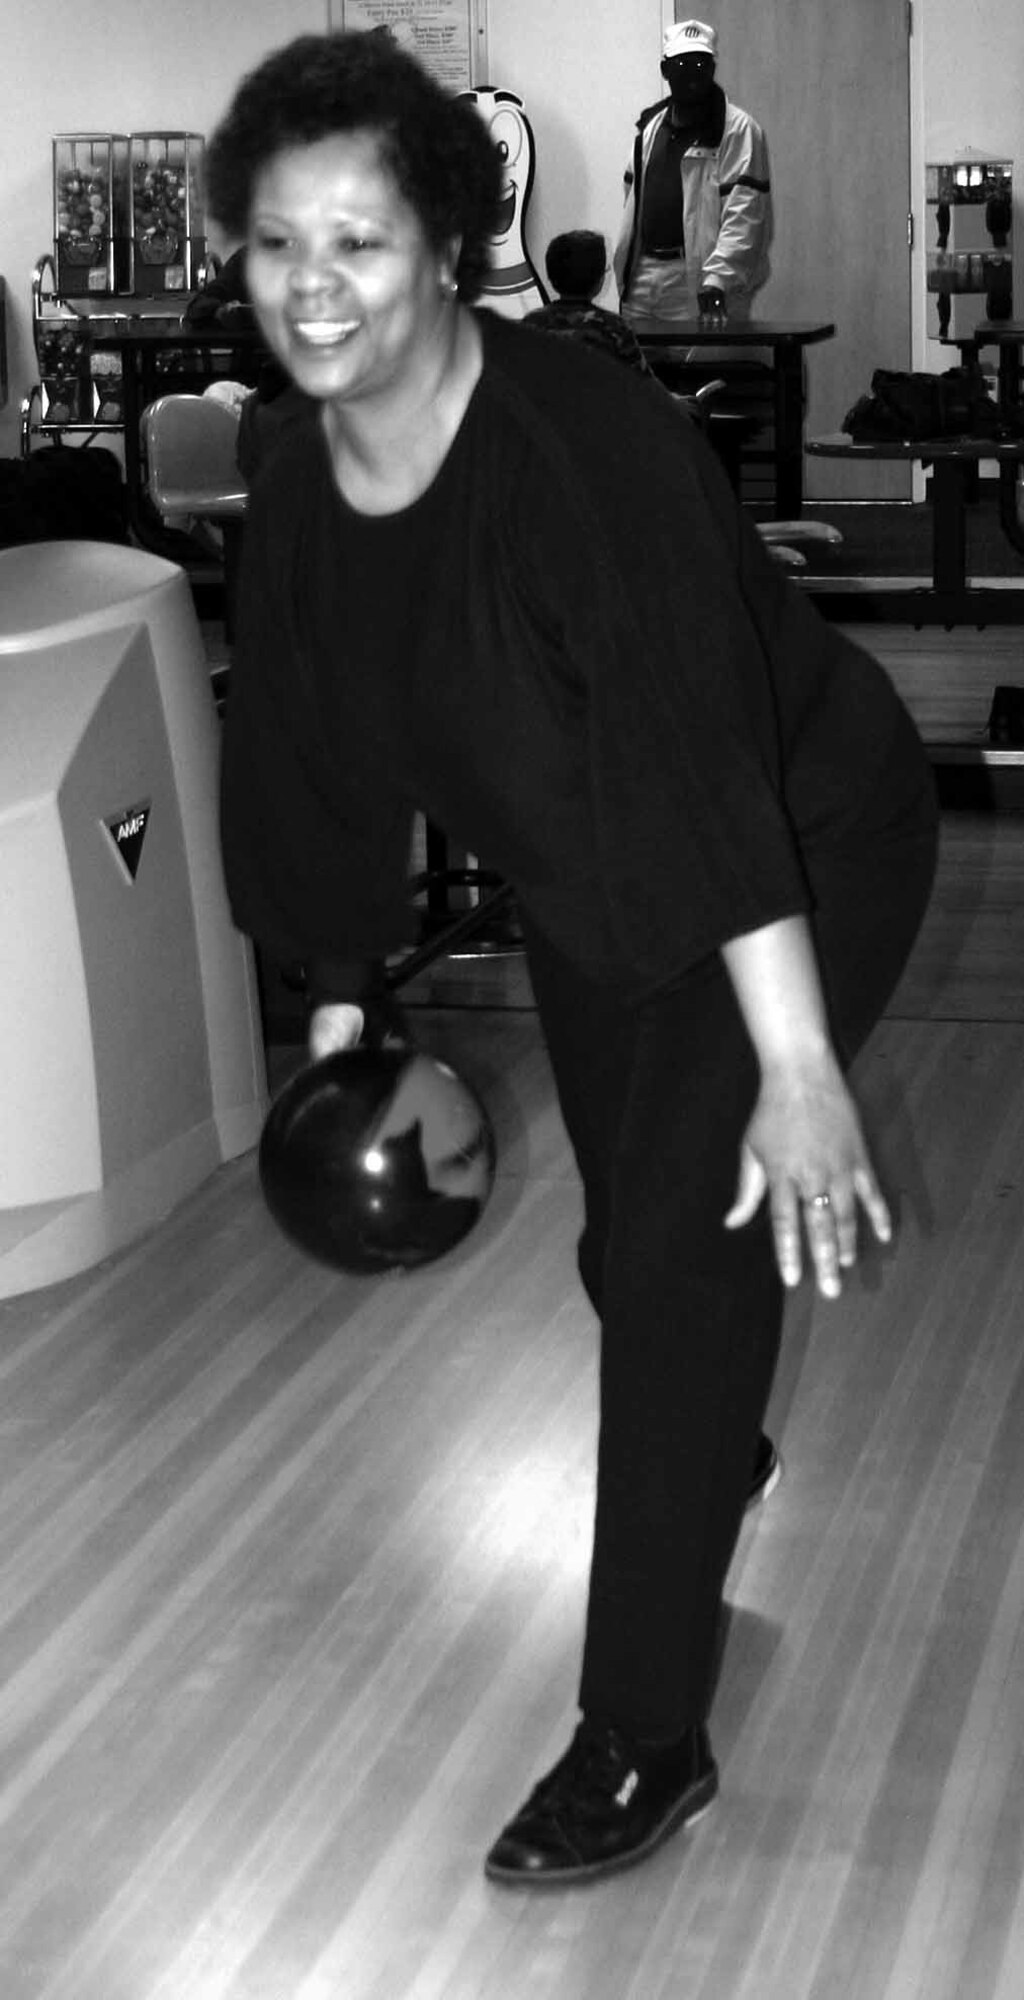 Rhonda Wright, logistics management specialist with the 848th Combat Sustainment Group, bowled an 823 series at the Tinker Bowling Center Feb. 28.  She bowled a 246-277-300 for an 823 tying the center's high series score in history (Men 823/Women 781).  Ms. Wright has received many accolades in the sport with four sanctioned 300 games, a 299 game, numerous 700 series, numerous 11 in roll plaques and the lifetime achievement award from WIBC for city high average (217) in 2006.  (Air Force photo by Kimberly Woodruff)